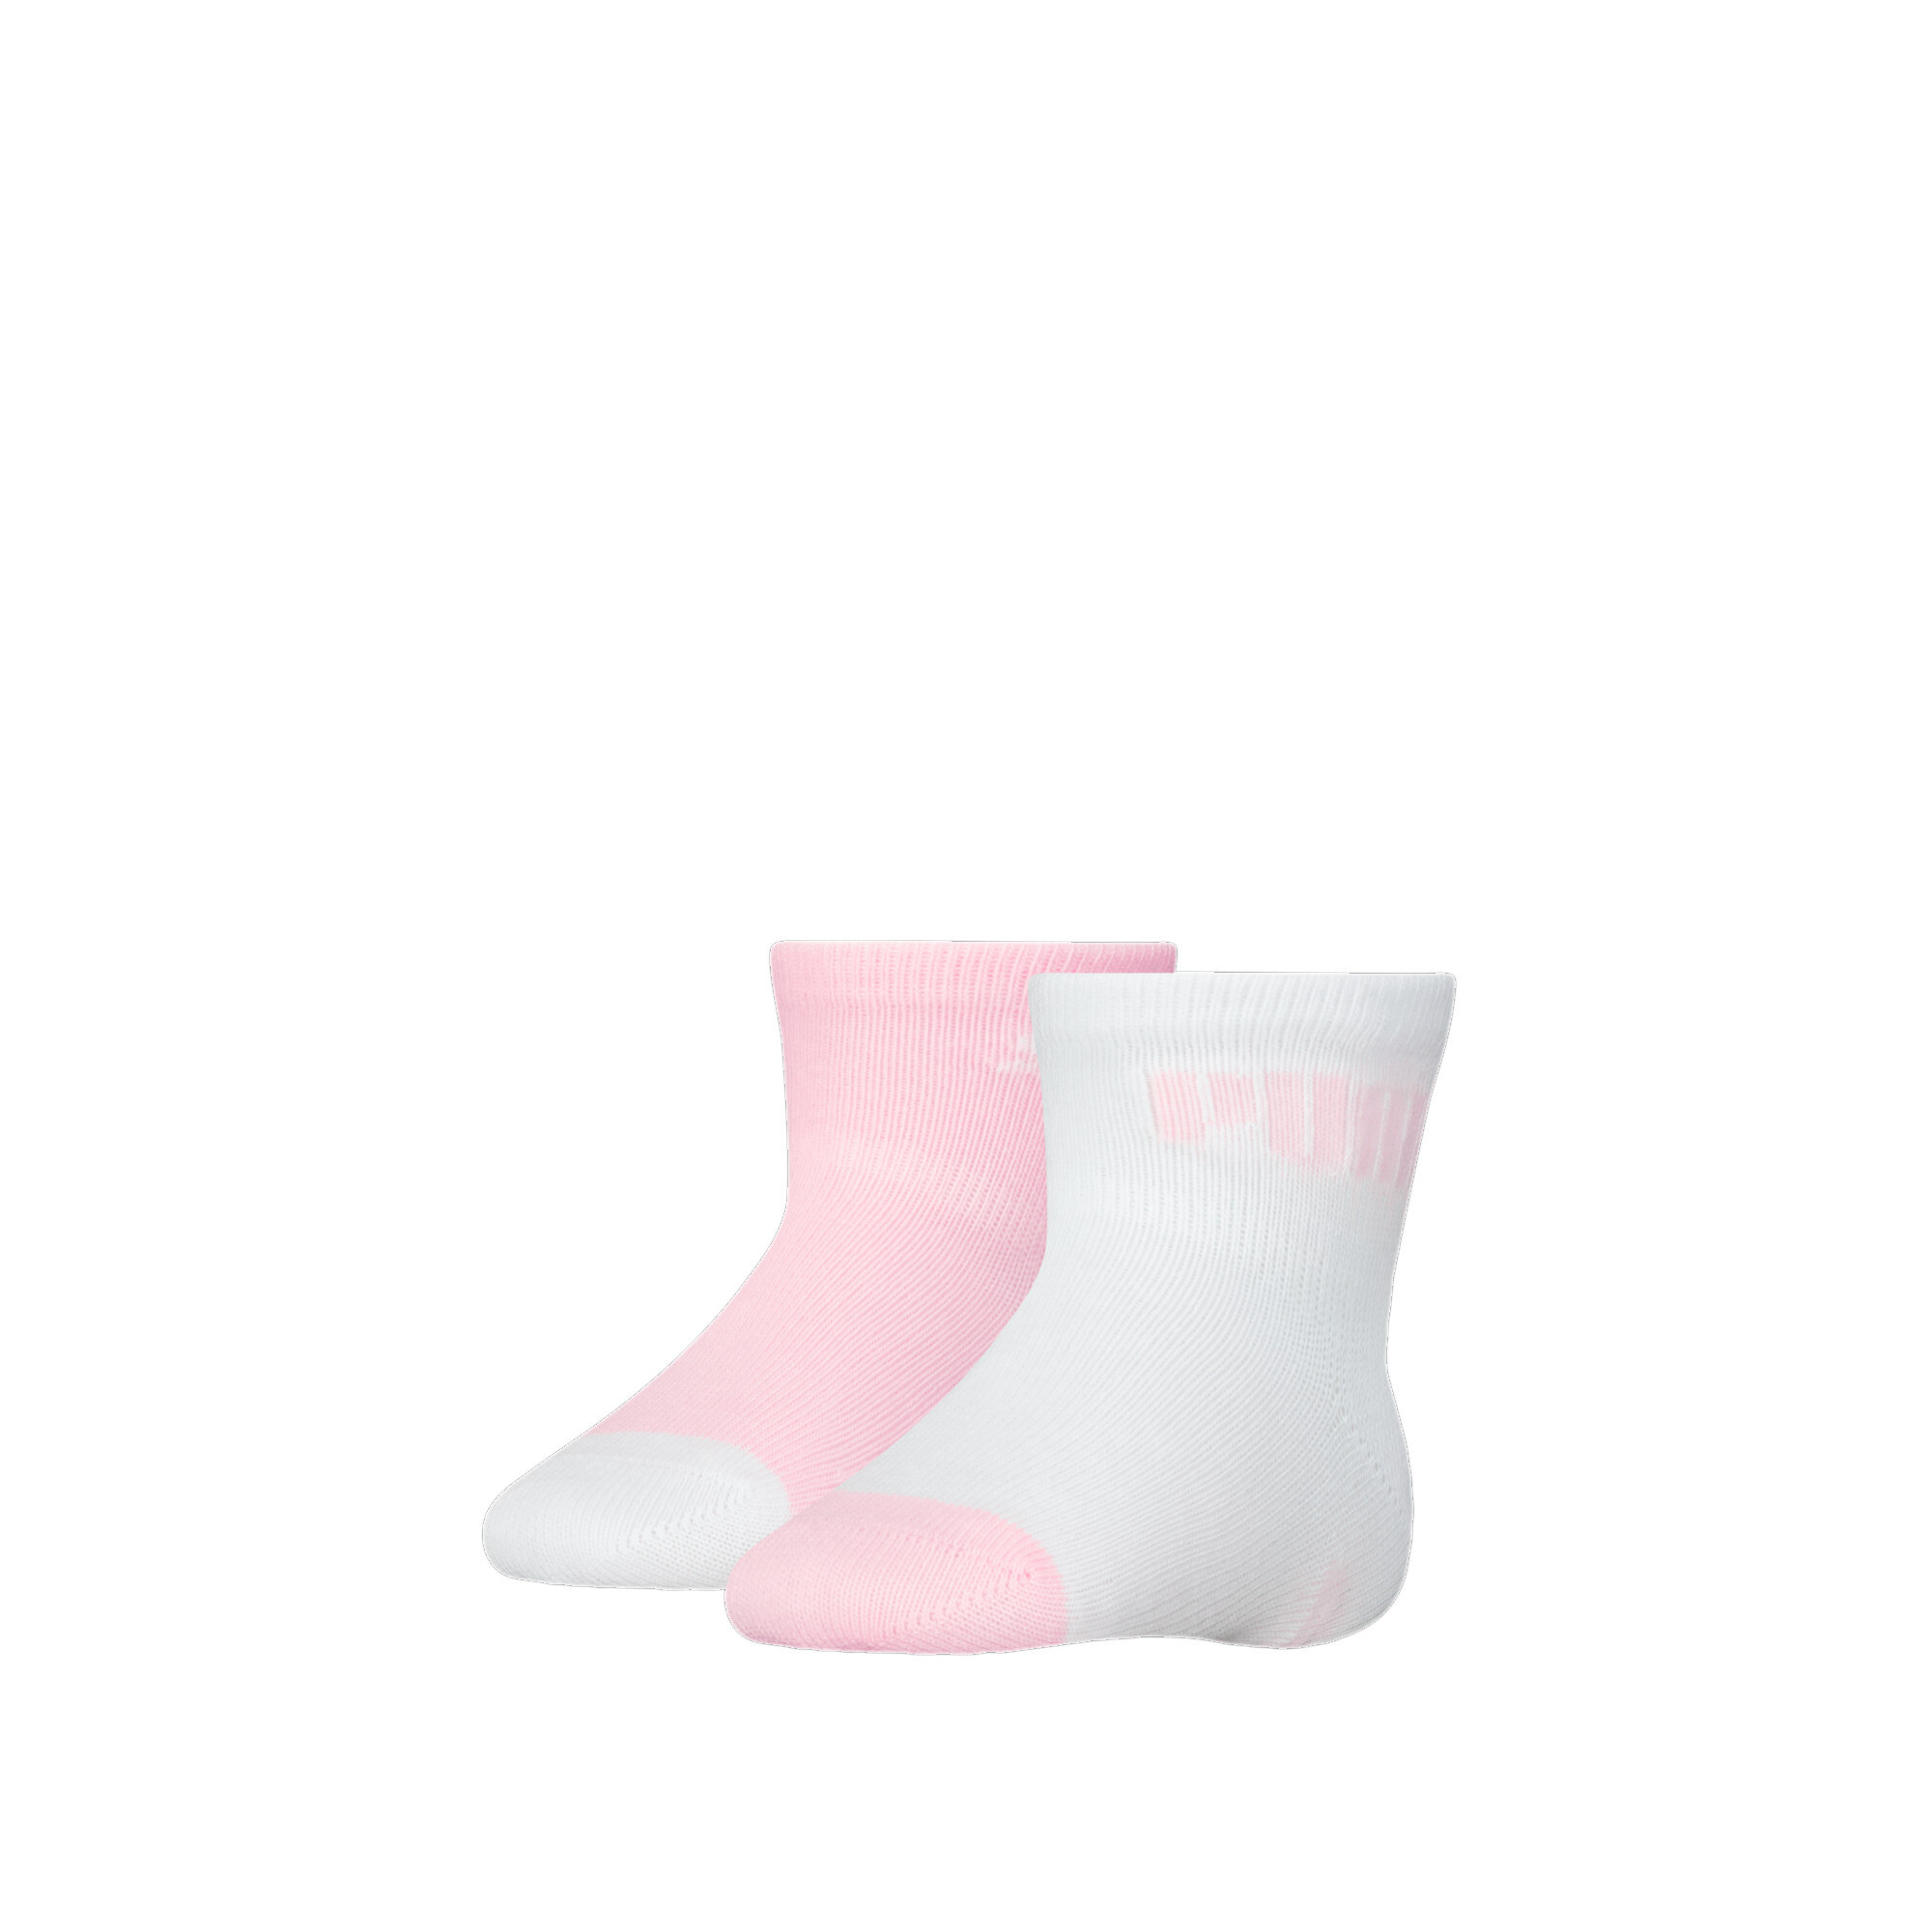 Puma Baby Classic Socks 2 Pack, Pink, Size 27-30, Age